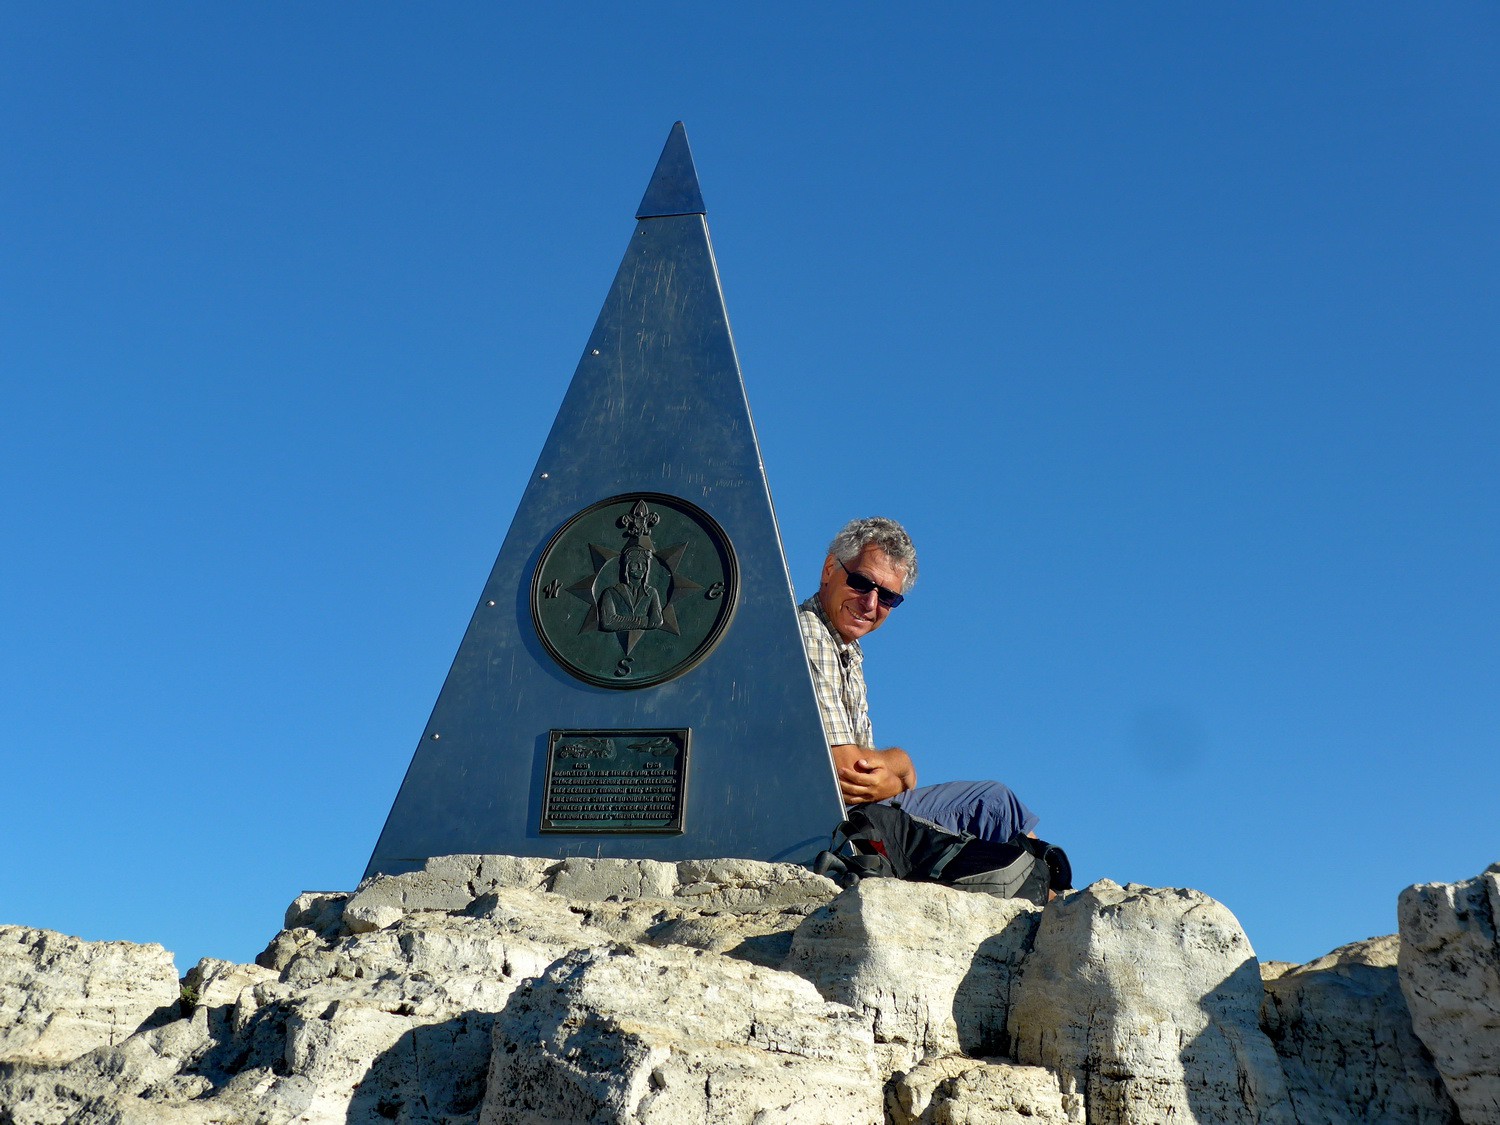 Alfred on top of 2667 meters high Guadalupe Peak which is the tallest mountain of Texas